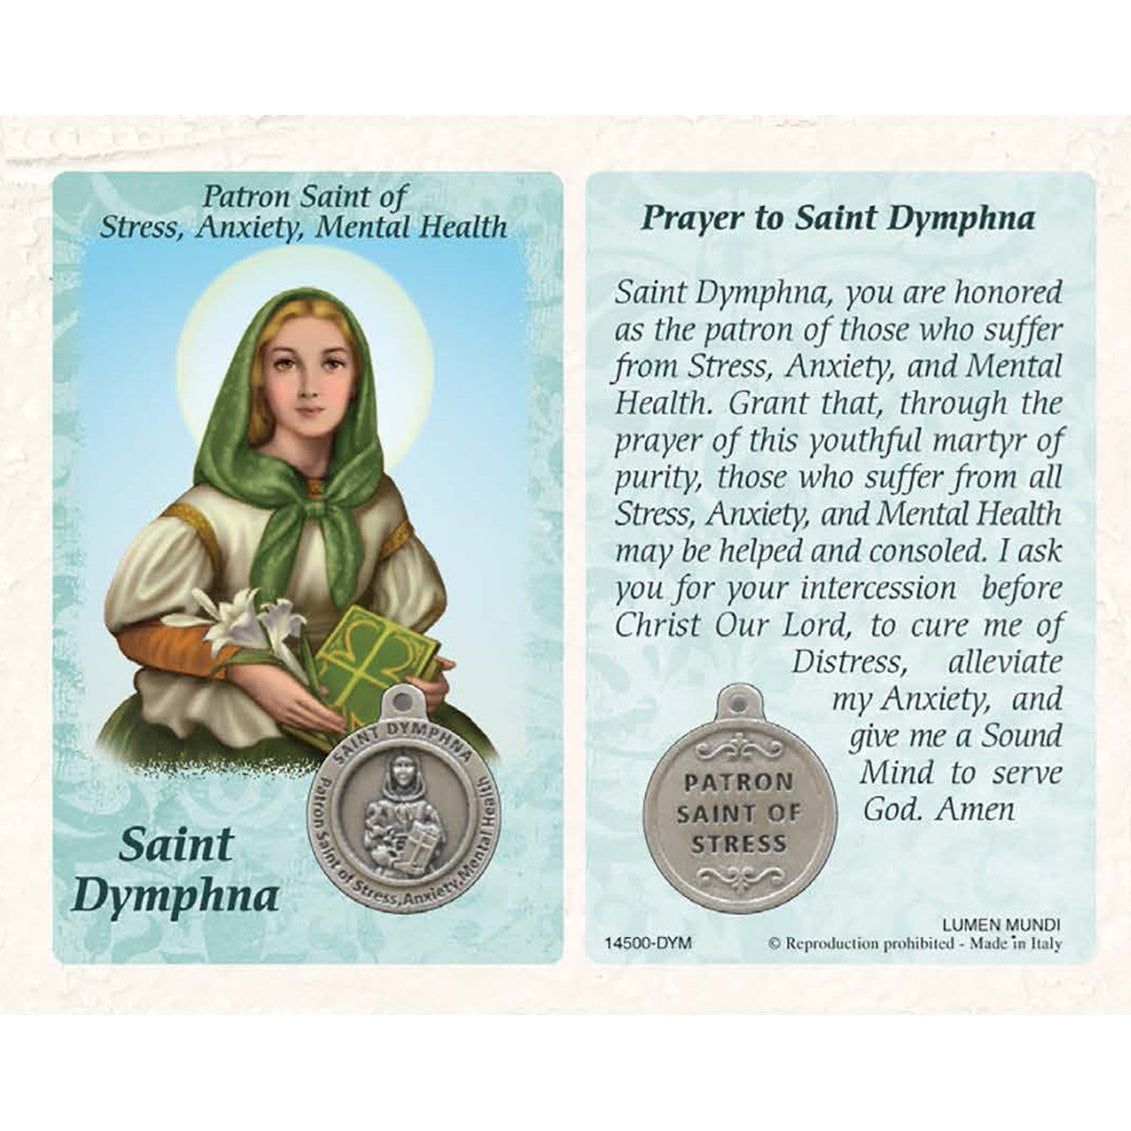 St Dymphna Patron Saint of Stress and Anxiety